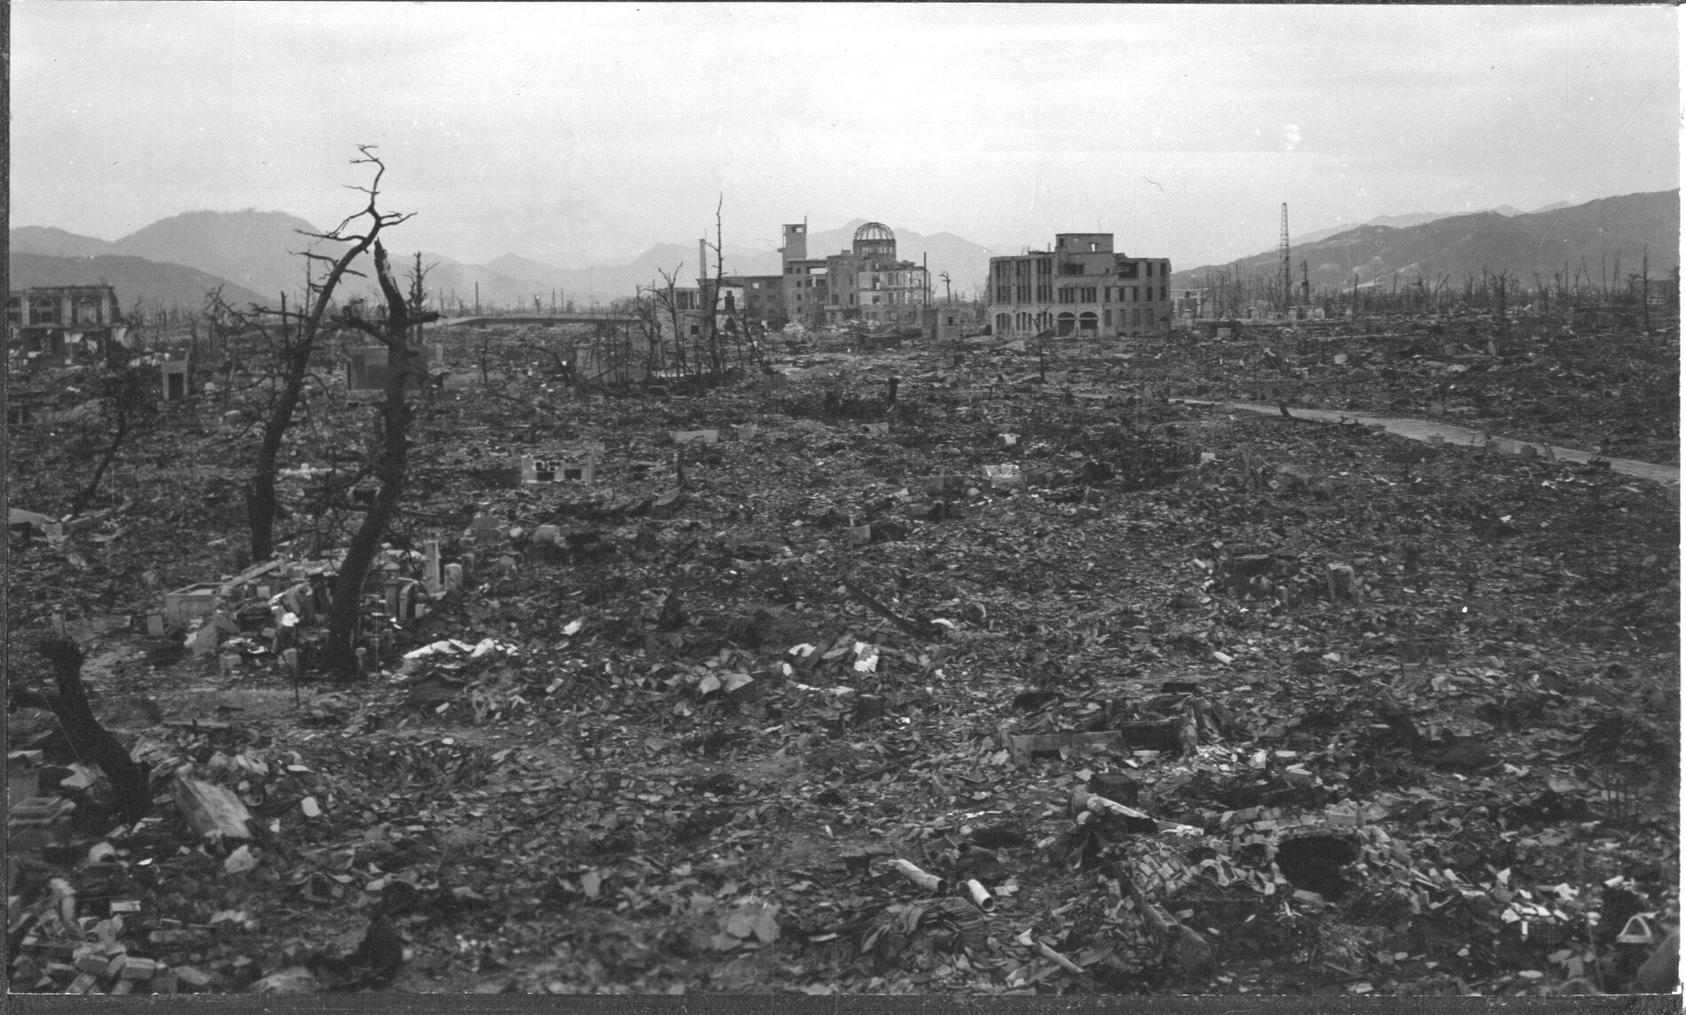 The center of Hiroshima as Navy Lieutenant Mark Hatfield saw it soon after the atomic bombing. (U.S. National Archives)